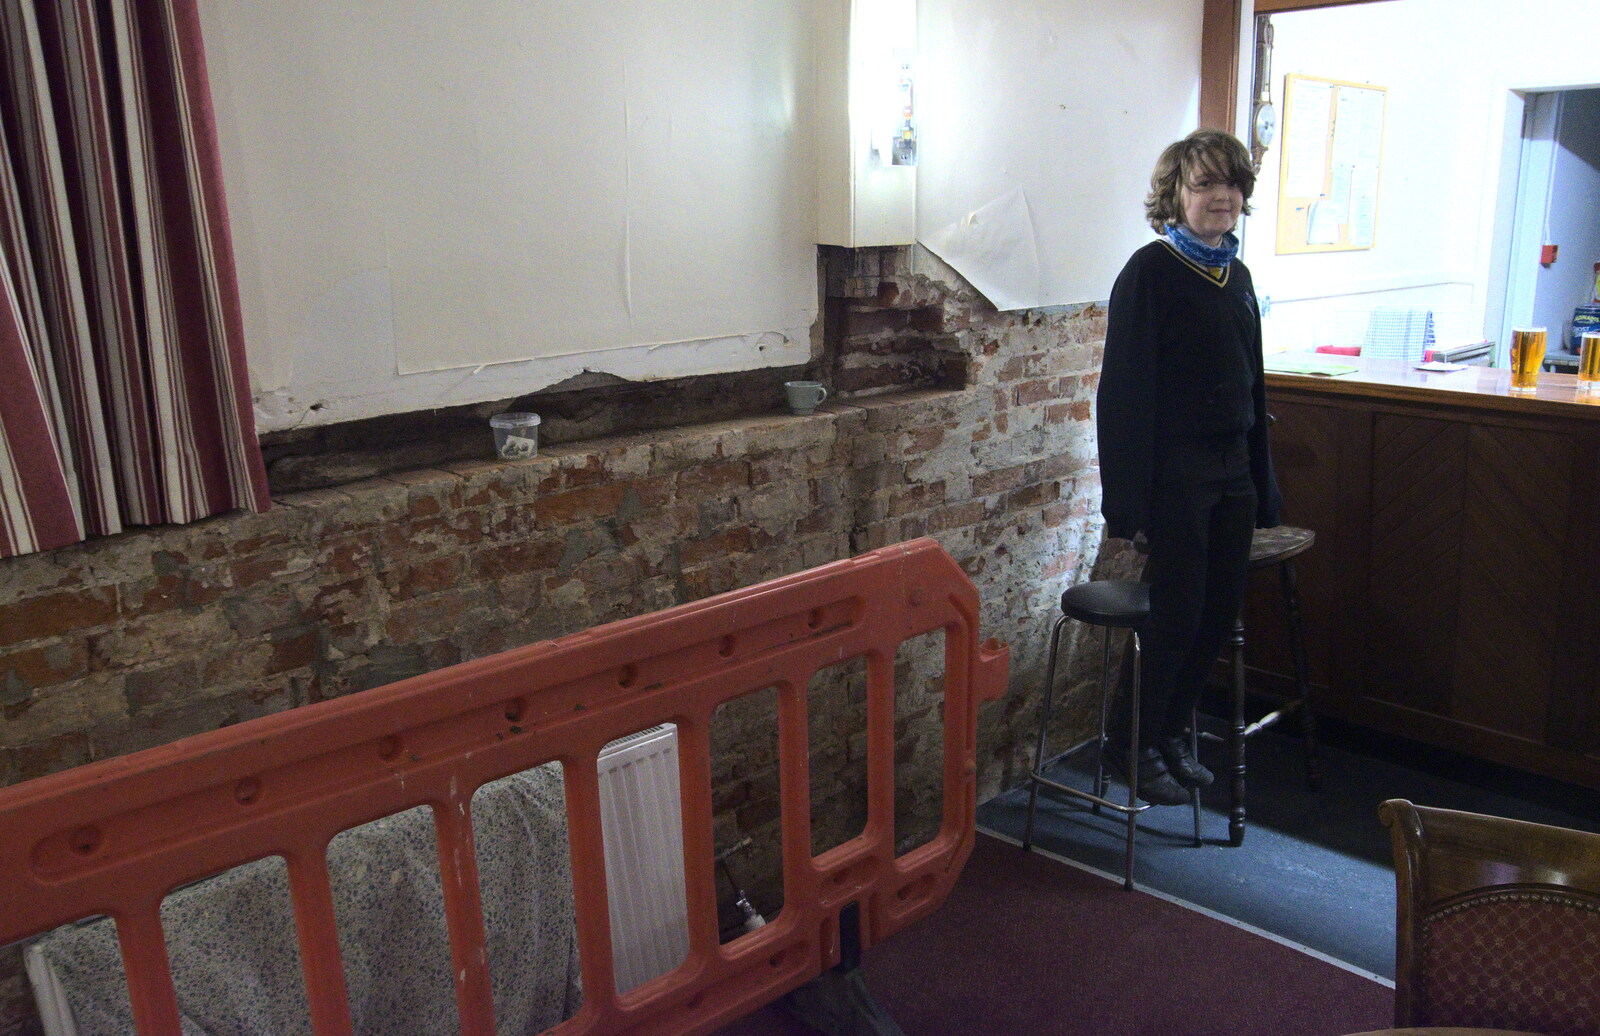 The wall has been strippped to sort the damp out from Supercharged Electrons and Pizza at the Village Hall, Brome, Suffolk - 23rd January 2022